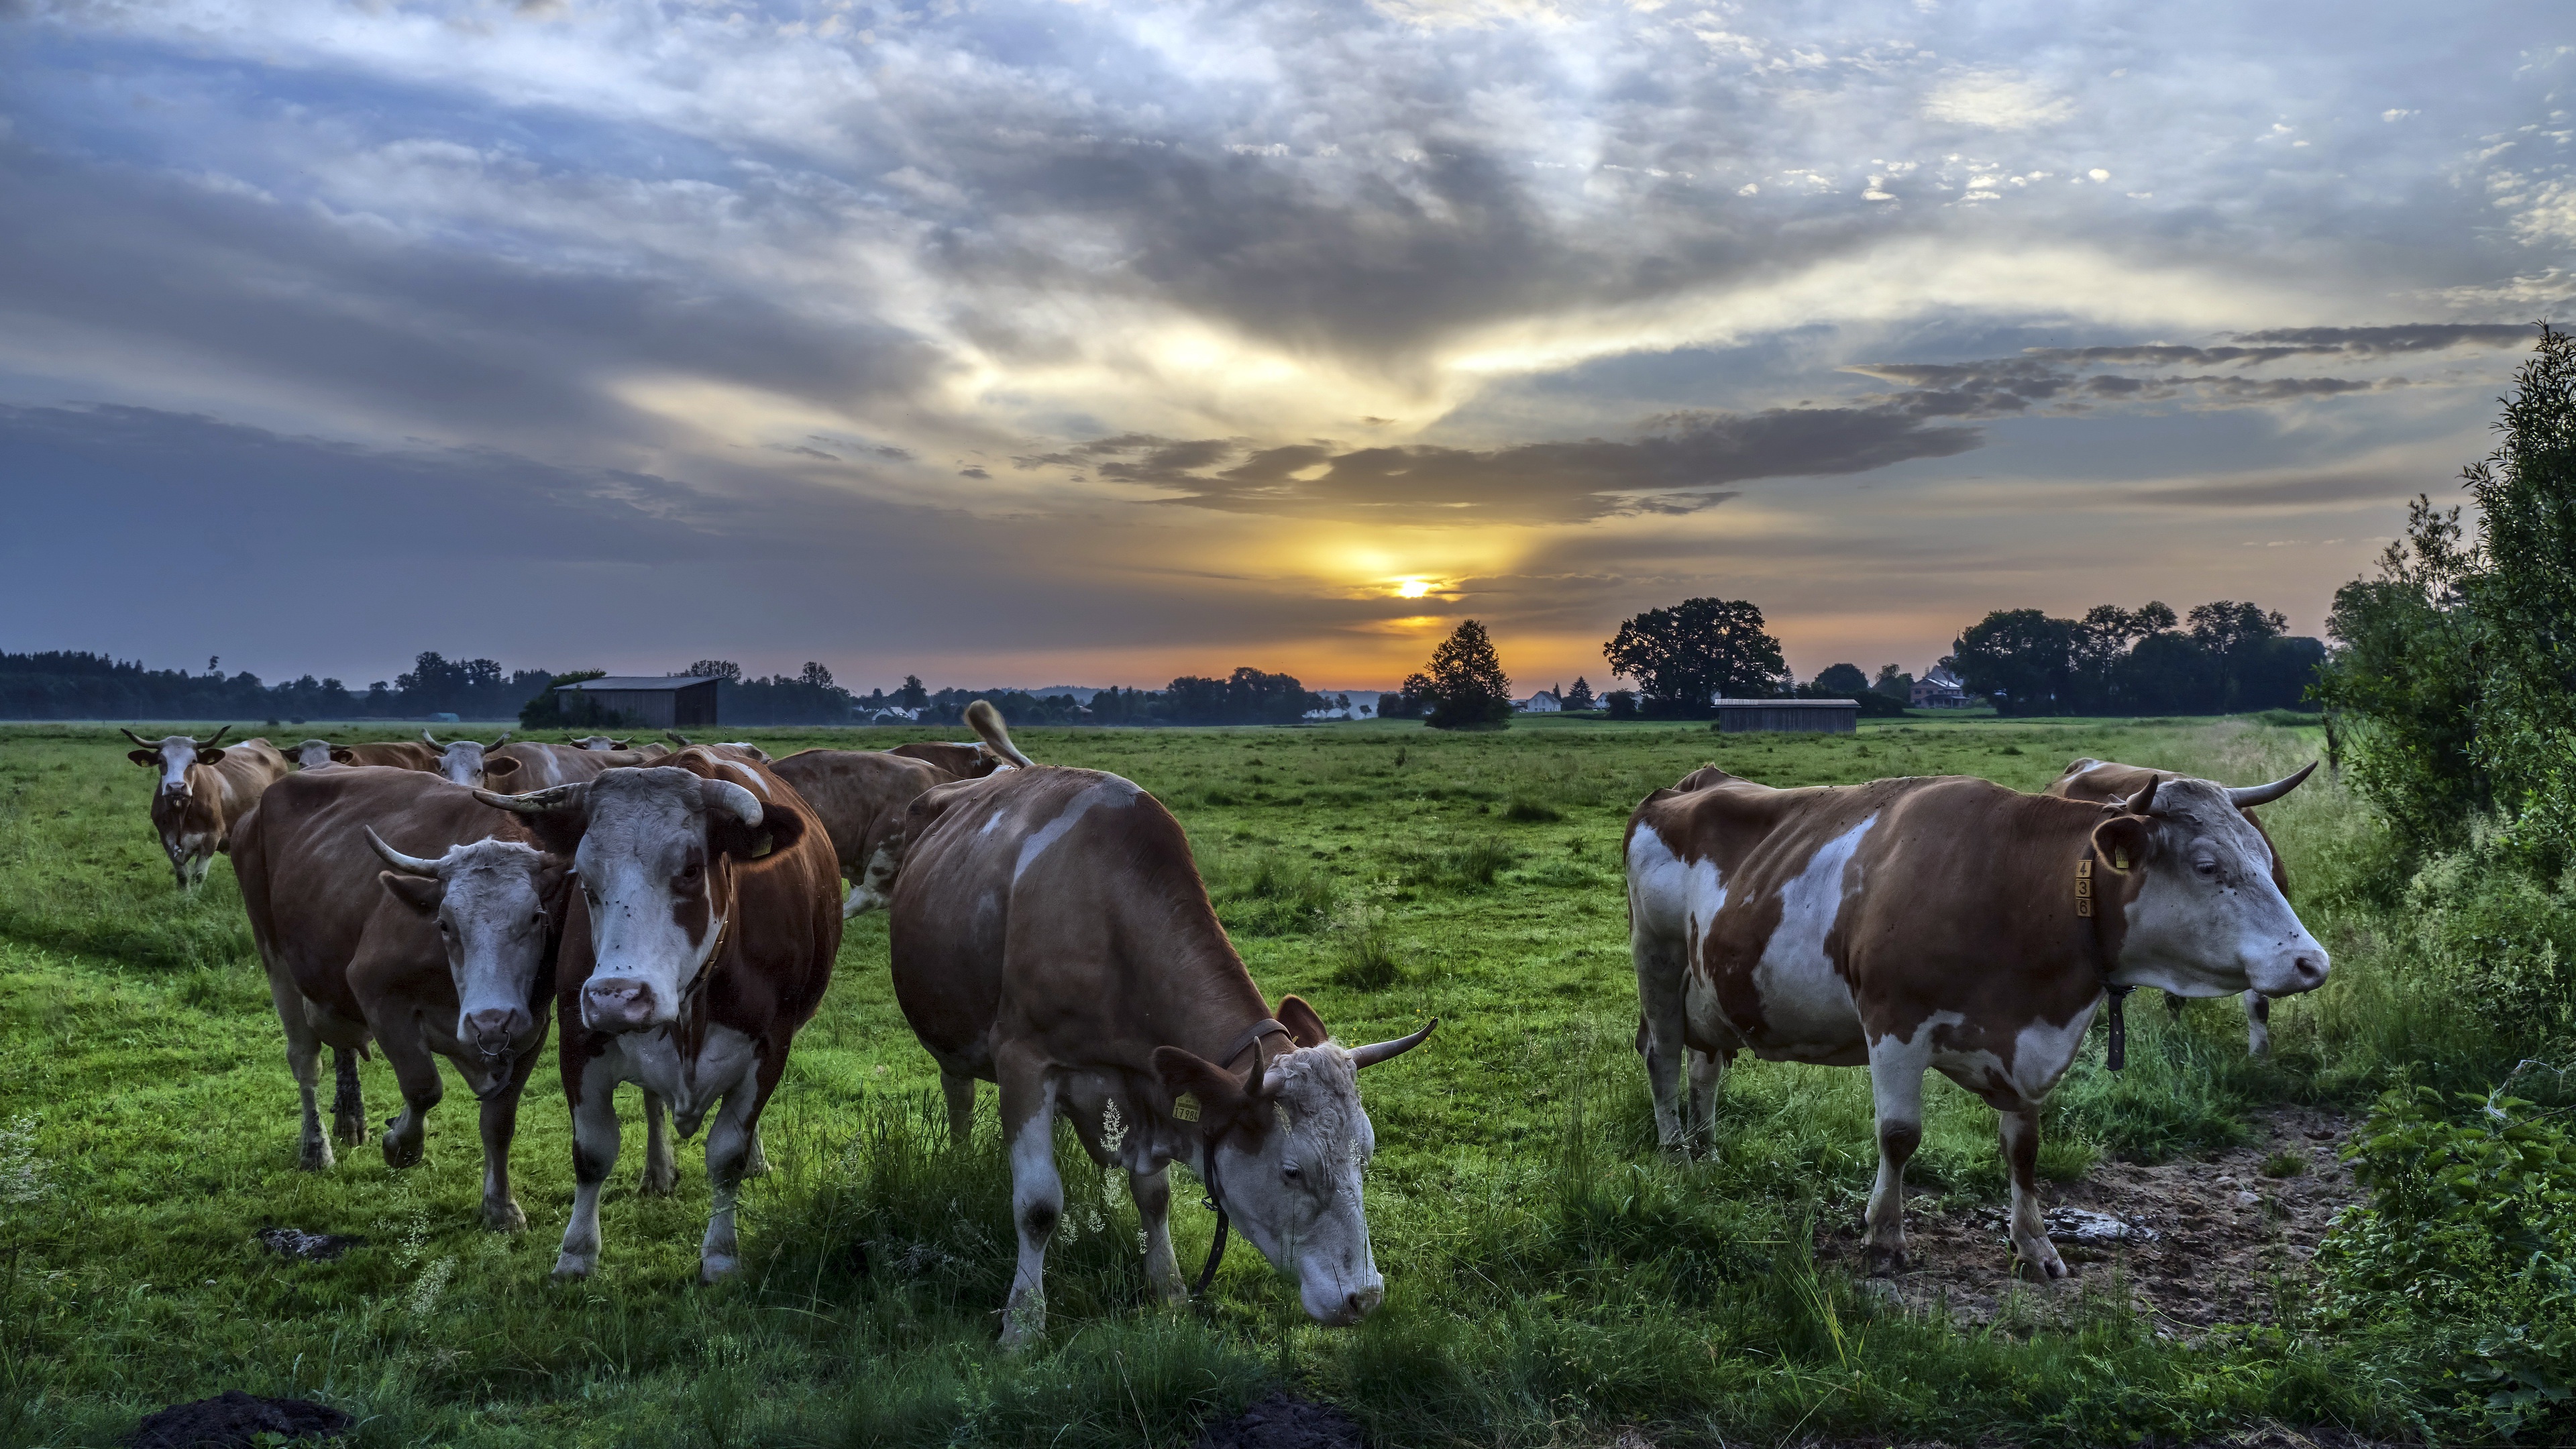 General 3840x2160 animals mammals cow field clouds outdoors nature